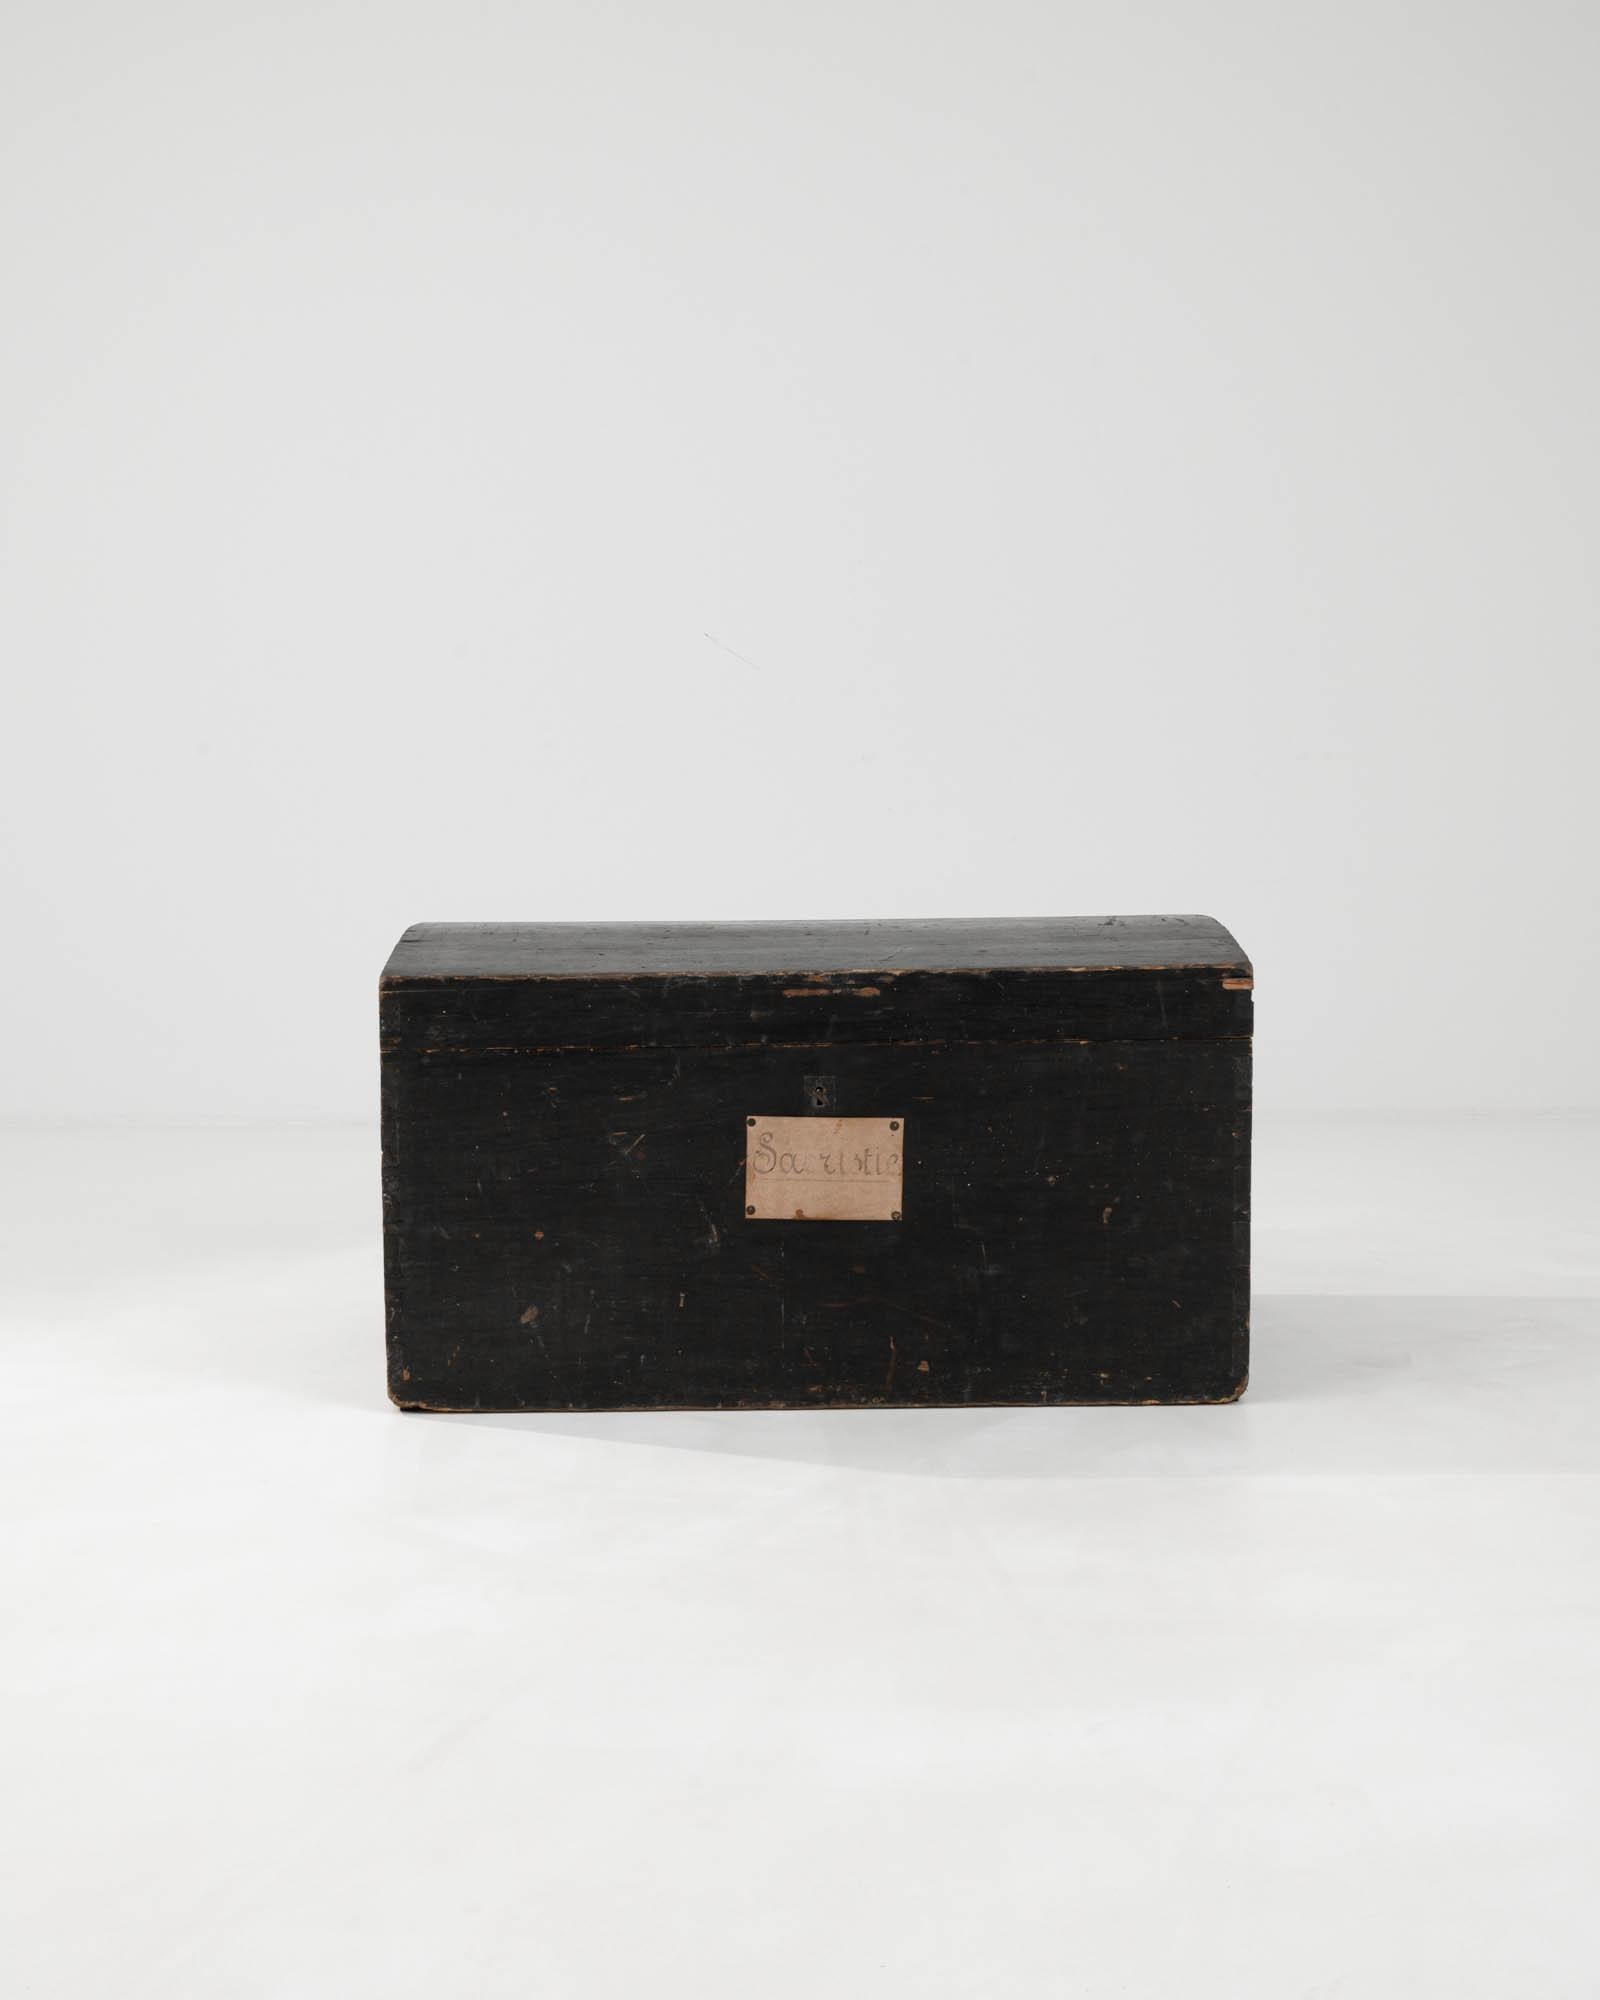 This 19th Century French Wooden Chest is a treasure trove of antiquity, offering a storied piece to store your cherished belongings. Its sturdy, time-worn exterior, dressed in a deeply patinated black finish, suggests a rich history and a life